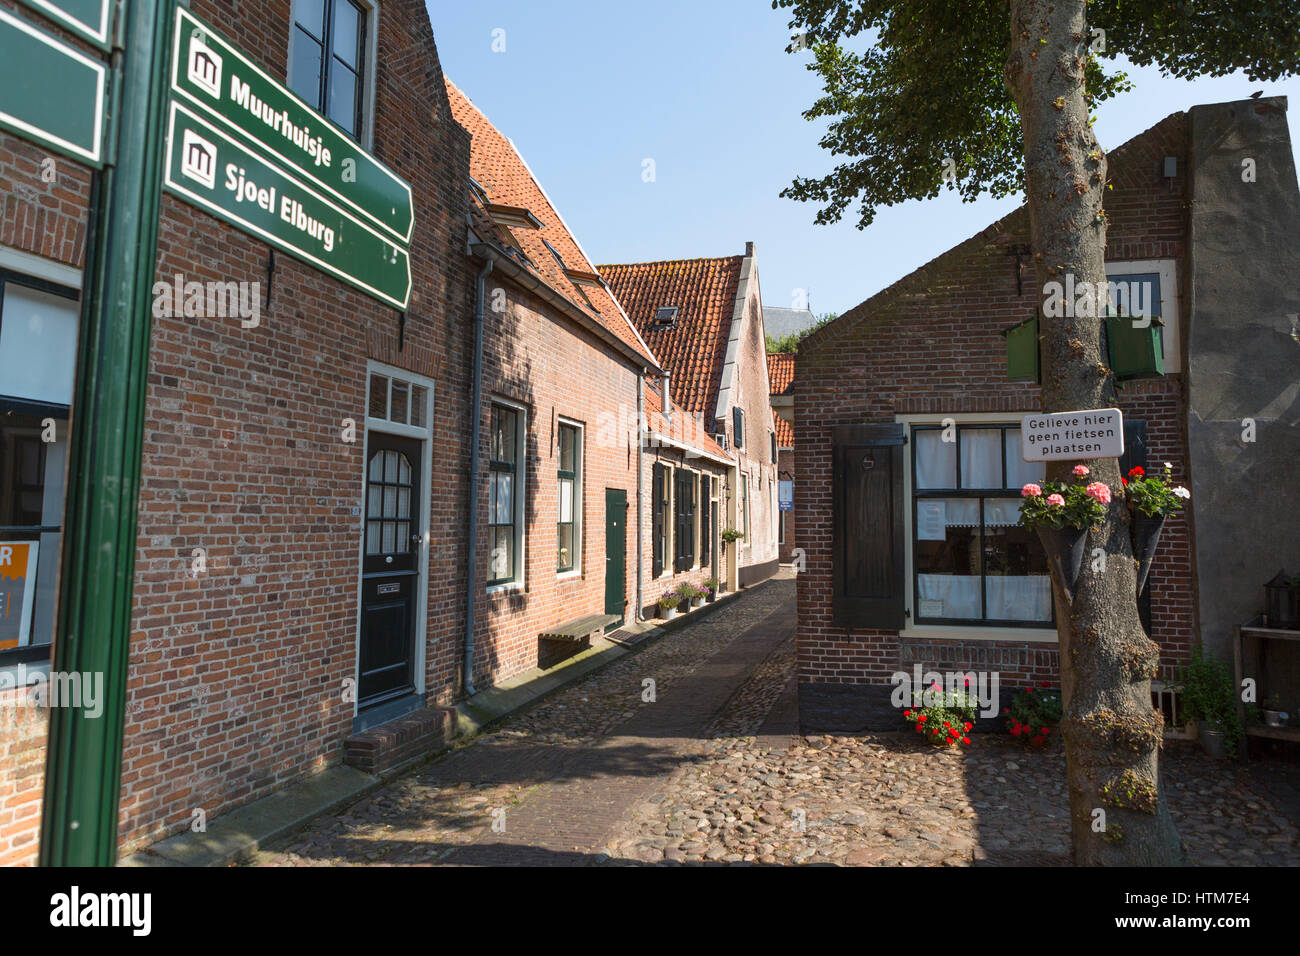 Nostalgic alley in the old and touristic town of Elburg in the Netherlands Stock Photo